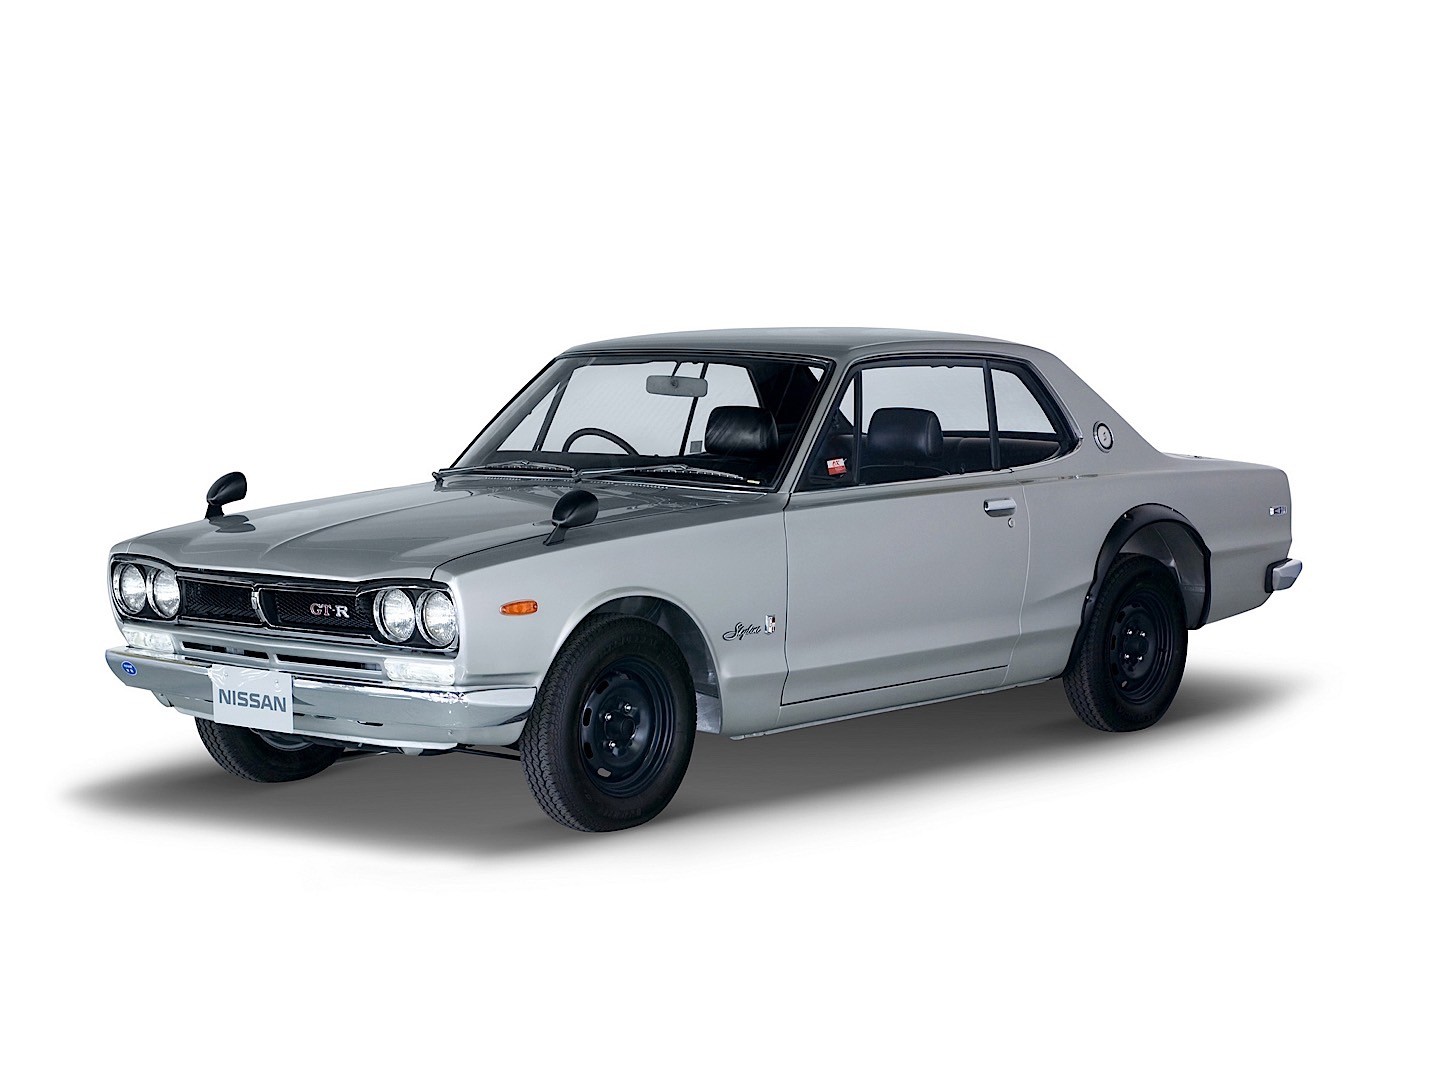 1971 Nissan Skyline GT-R KPGC10  The Fast and the Furious Wiki